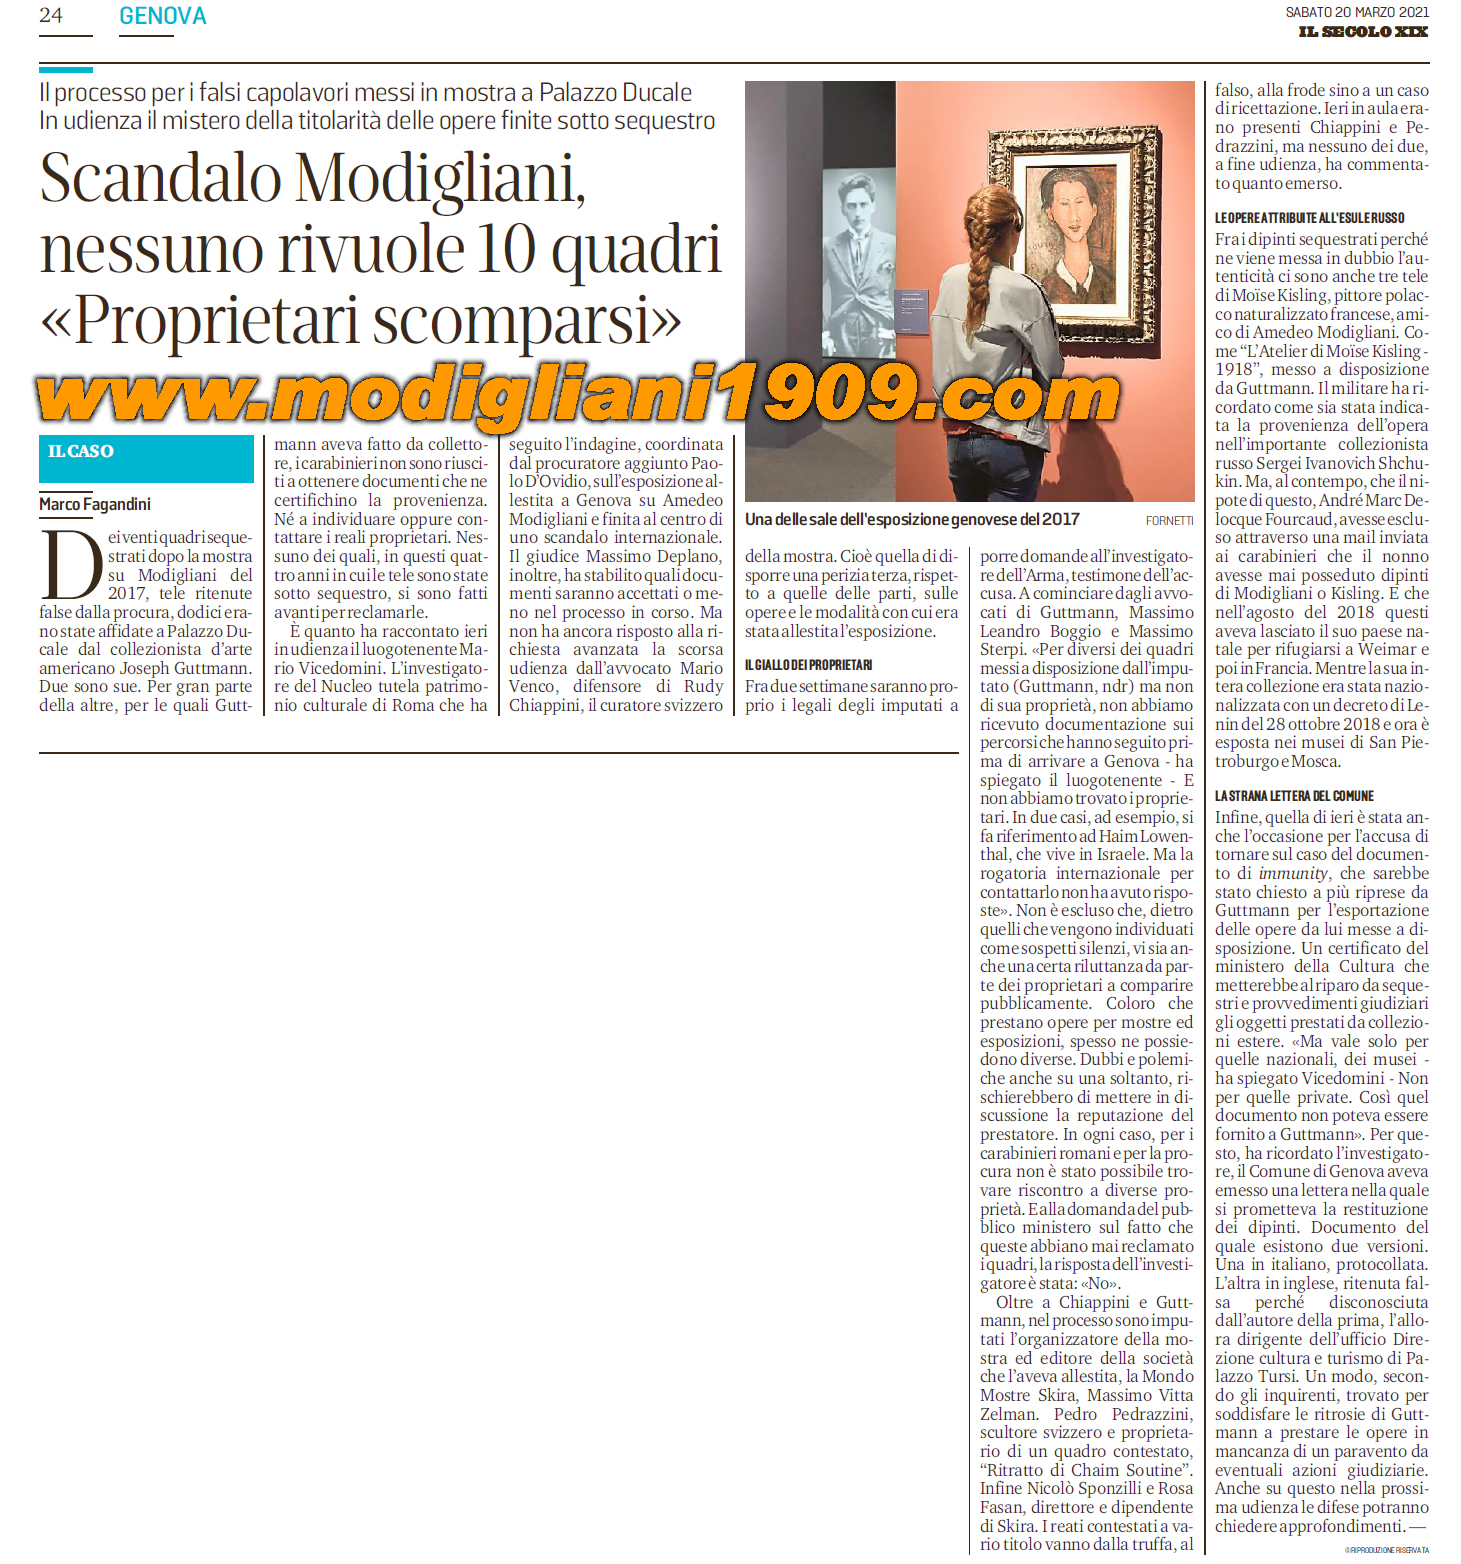 Modigliani scandal: nobody wants the 10 paintings back. The owners are disappeared!